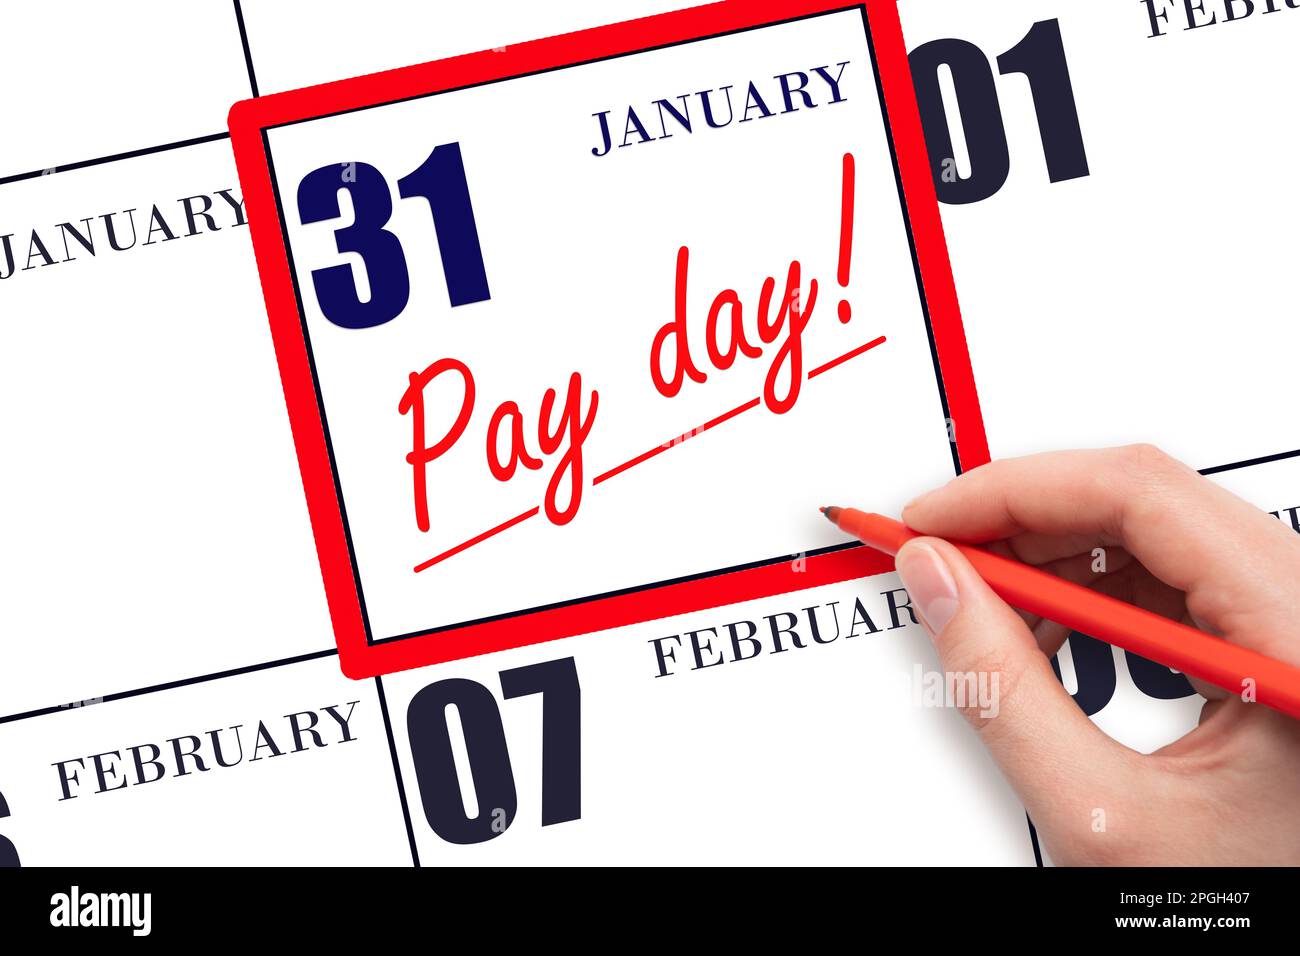 31st day of January. Hand writing text PAY DATE on calendar date January 31 and underline it. Payment due date. Reminder concept of payment. Winter mo Stock Photo